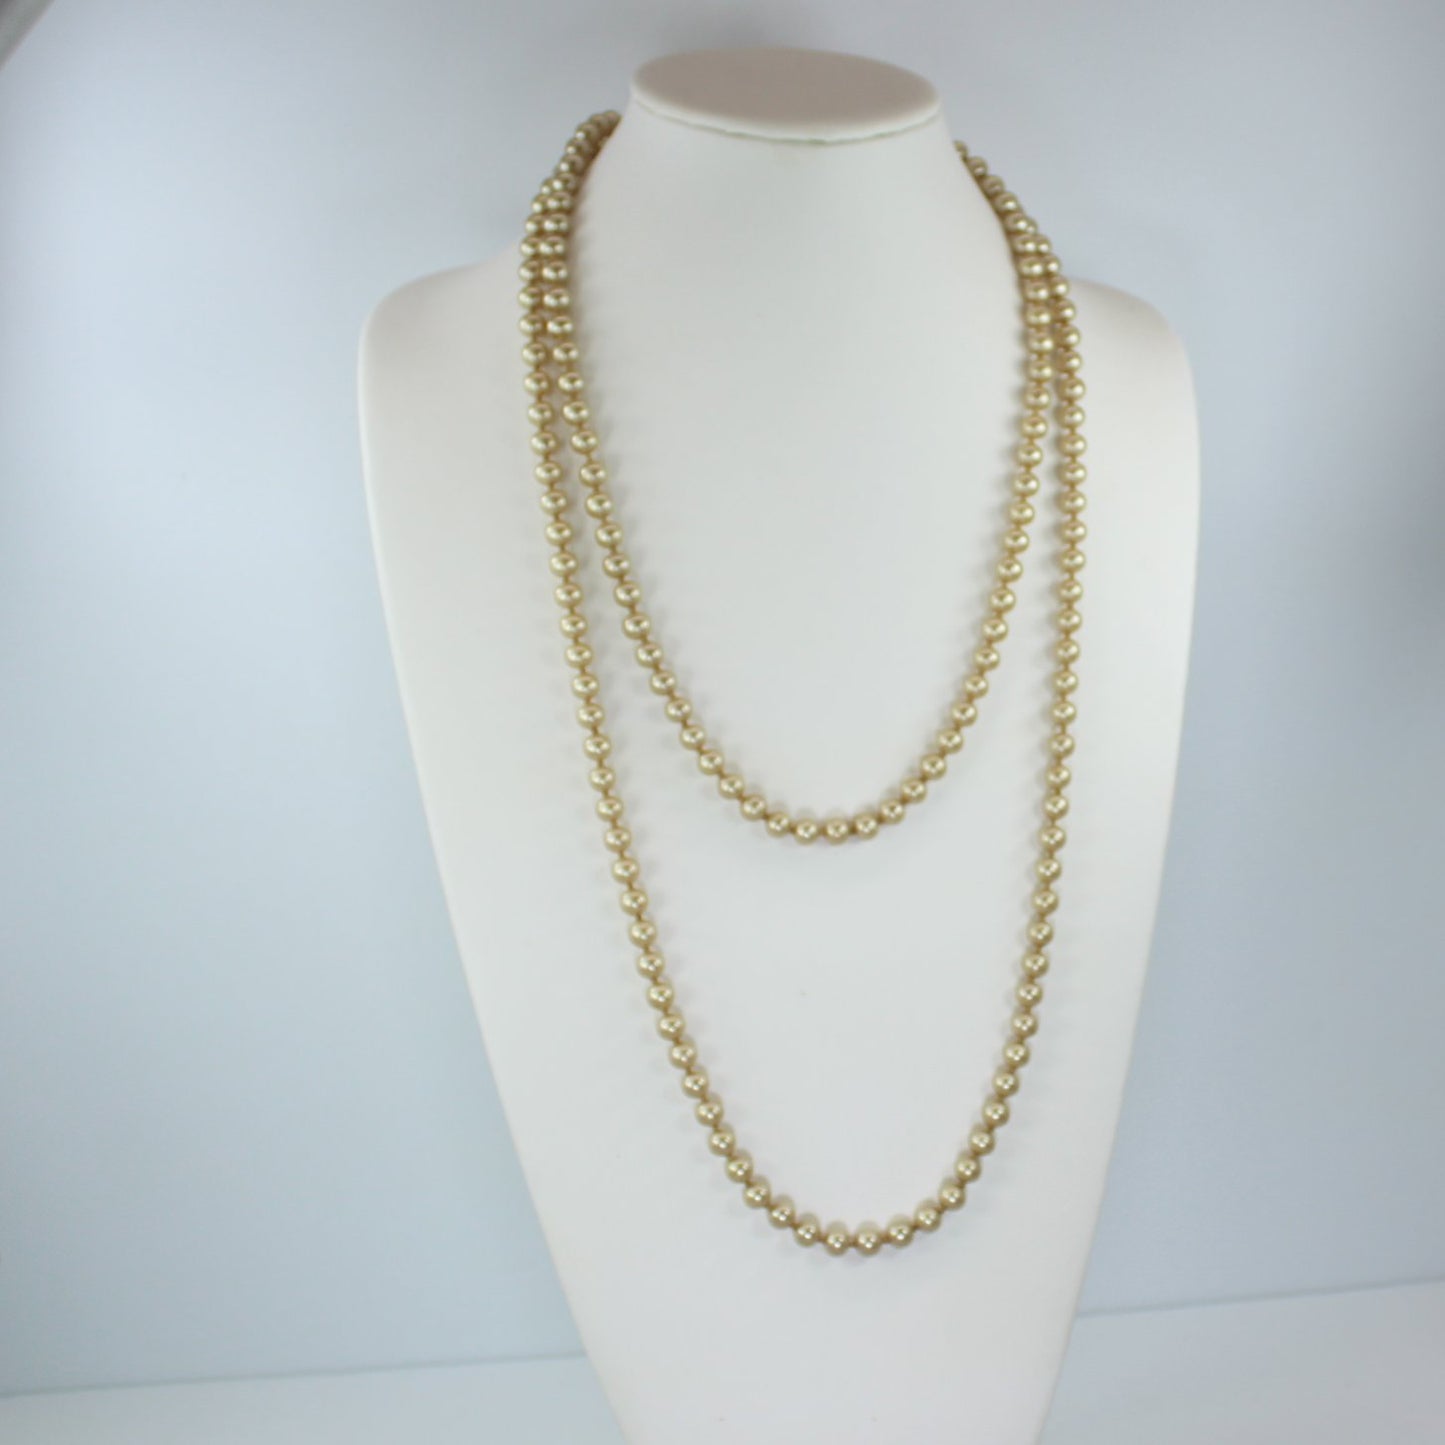 Rope Length 57" Necklace Faux Champagne Pearls Individually Knotted Vintage 2 x wrap on neck